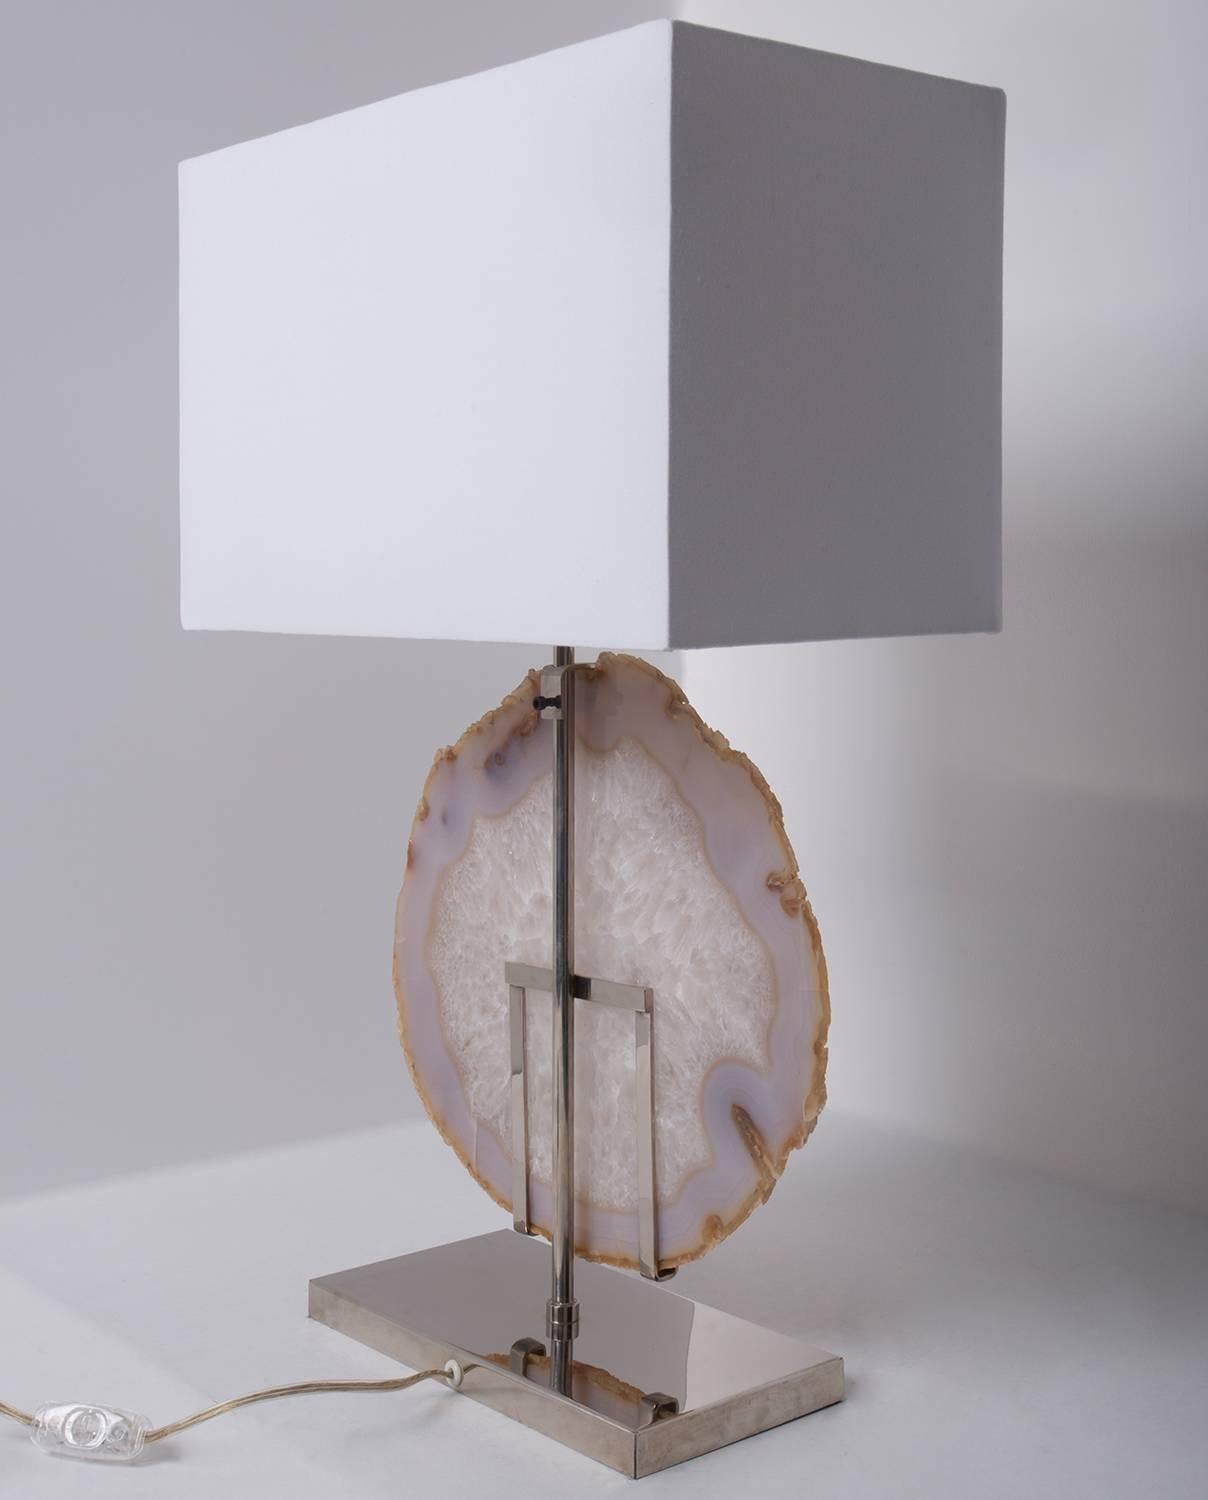 Organic Modern Table Lamp, White Agate, Brass with Nickel Finish Base, White Linen Shade